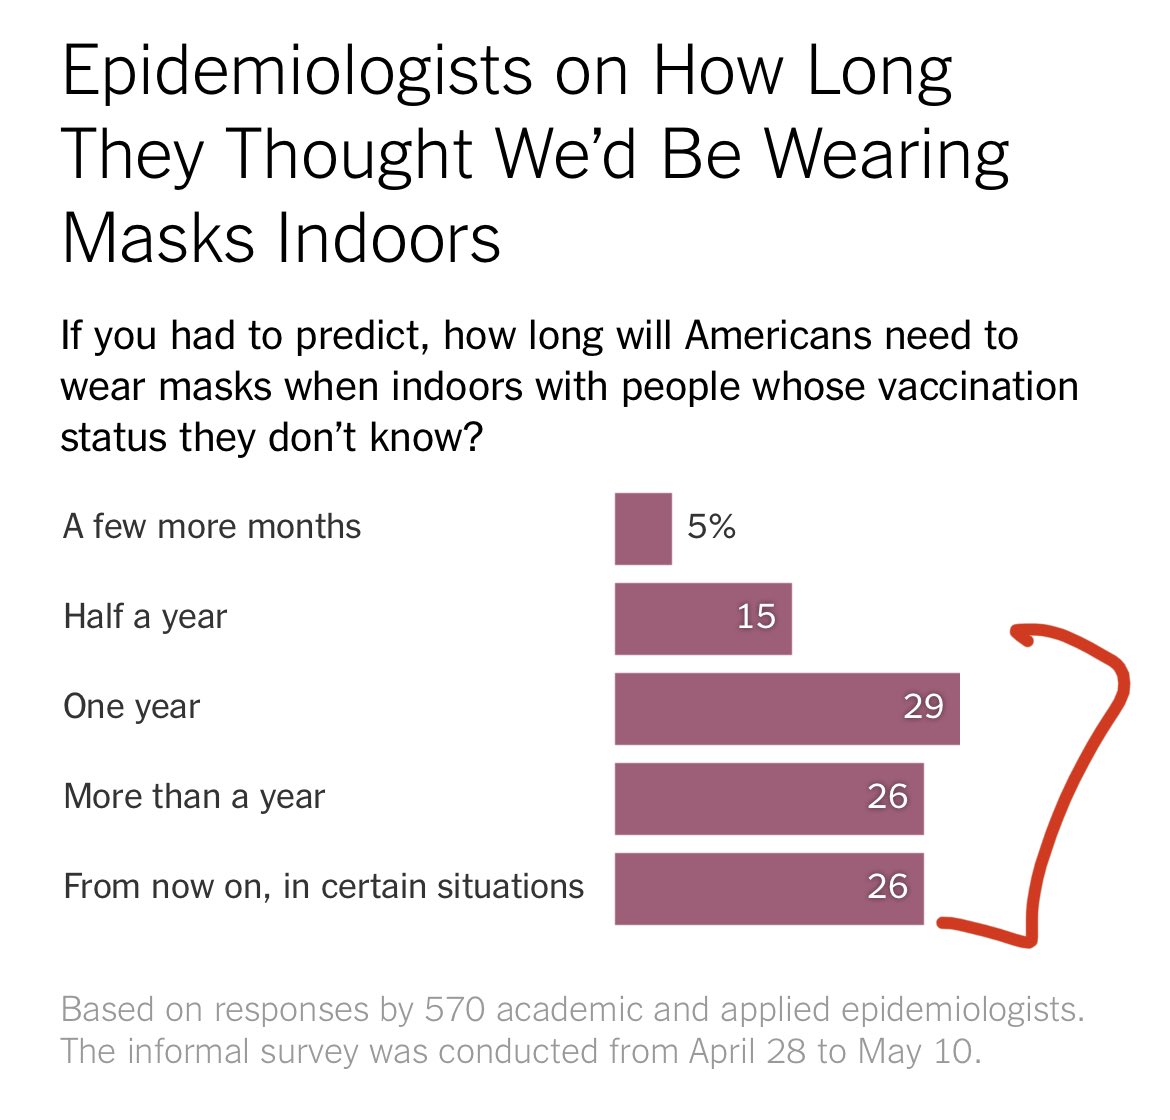 KEEP WEARING THE MASK—We card-carrying epidemiologists (with formal doctorate in epidemiology) know what we are talking about. Vast majority of 700+ epidemiologists surveyed says we would keep wearing masks for 1 year or longer. #COVID19 #MaskUp 

 nytimes.com/2021/05/13/ups…